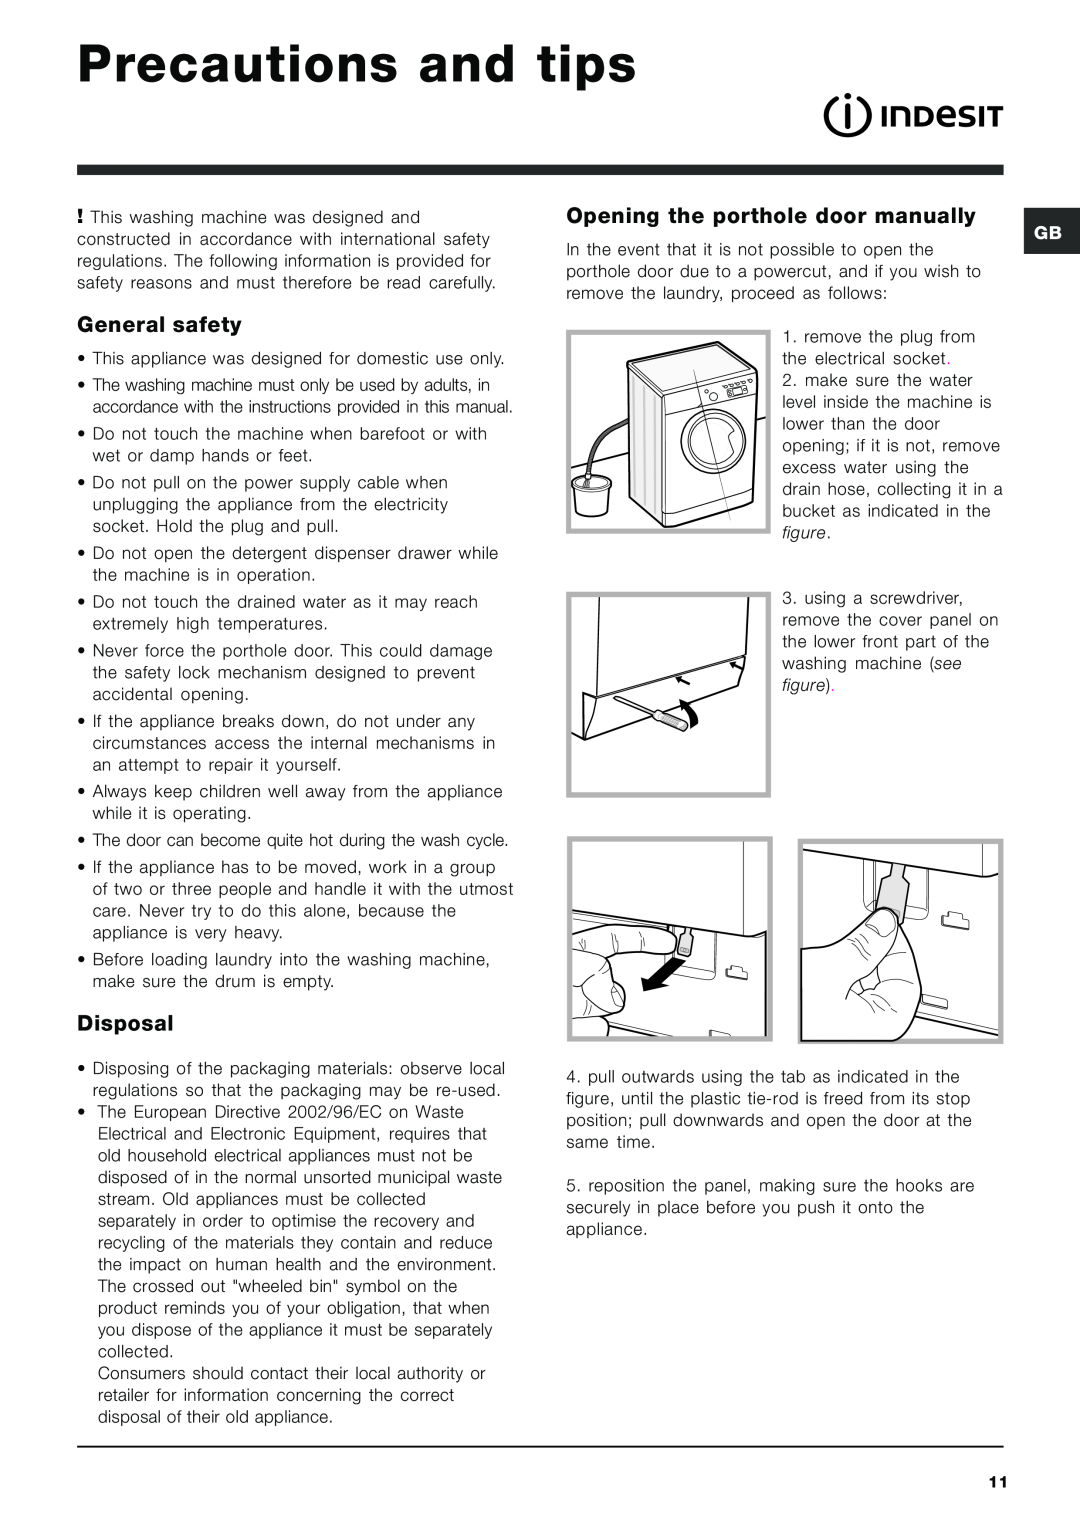 Indesit IWE7168 Precautions and tips, General safety, Disposal, Opening the porthole door manually 